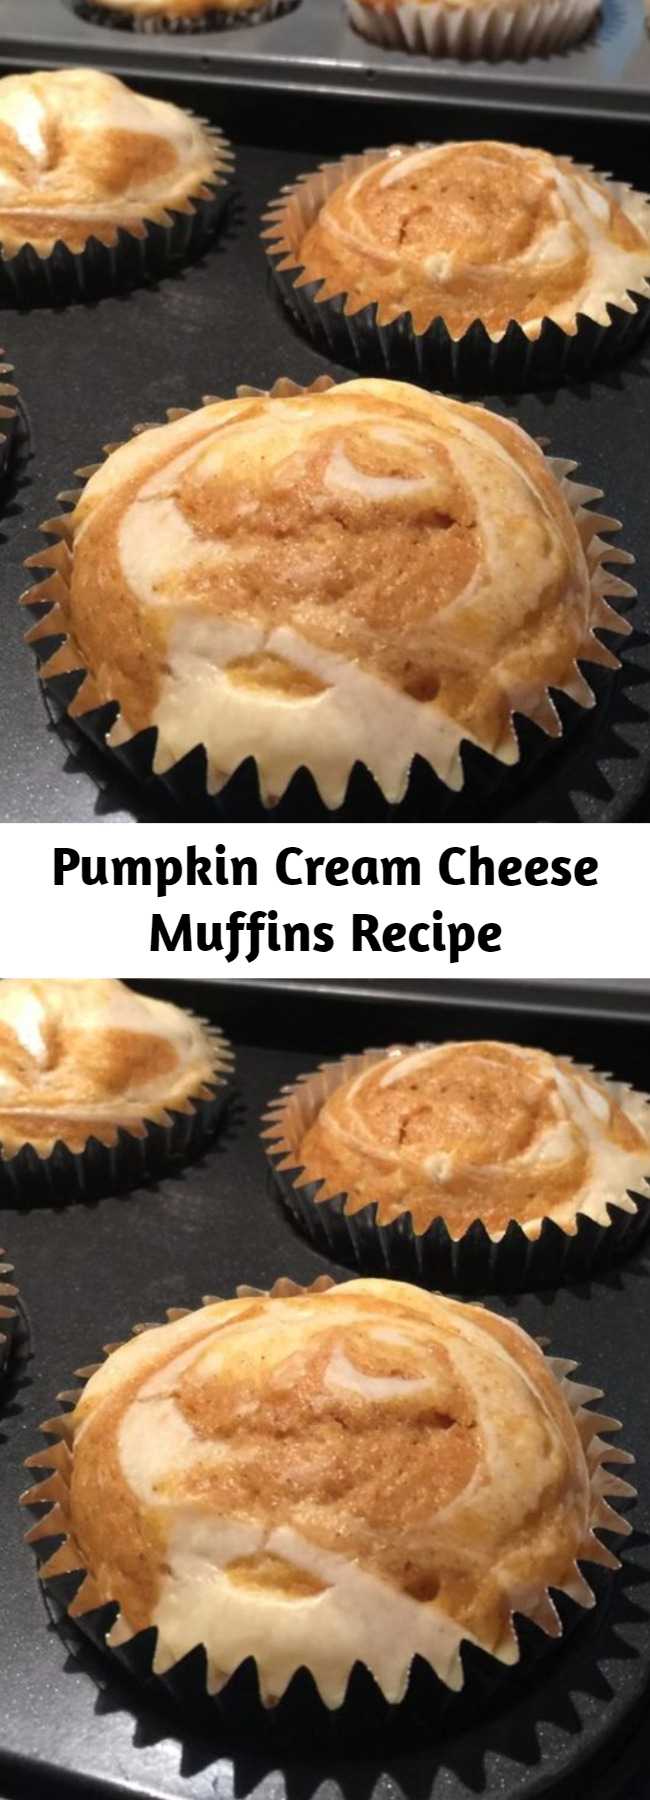 Pumpkin Cream Cheese Muffins Recipe - These muffins are the best! They are moist and very delicious. Not only taste great but looking so good as well! You'll be glad you made this recipe for pumpkin muffins with a cream cheese filling and a streusel topping. #breakfastrecipes #brunchrecipes #breakfastideas #brunchideas #muffins #muffinrecipes #baking #bakingrecipes